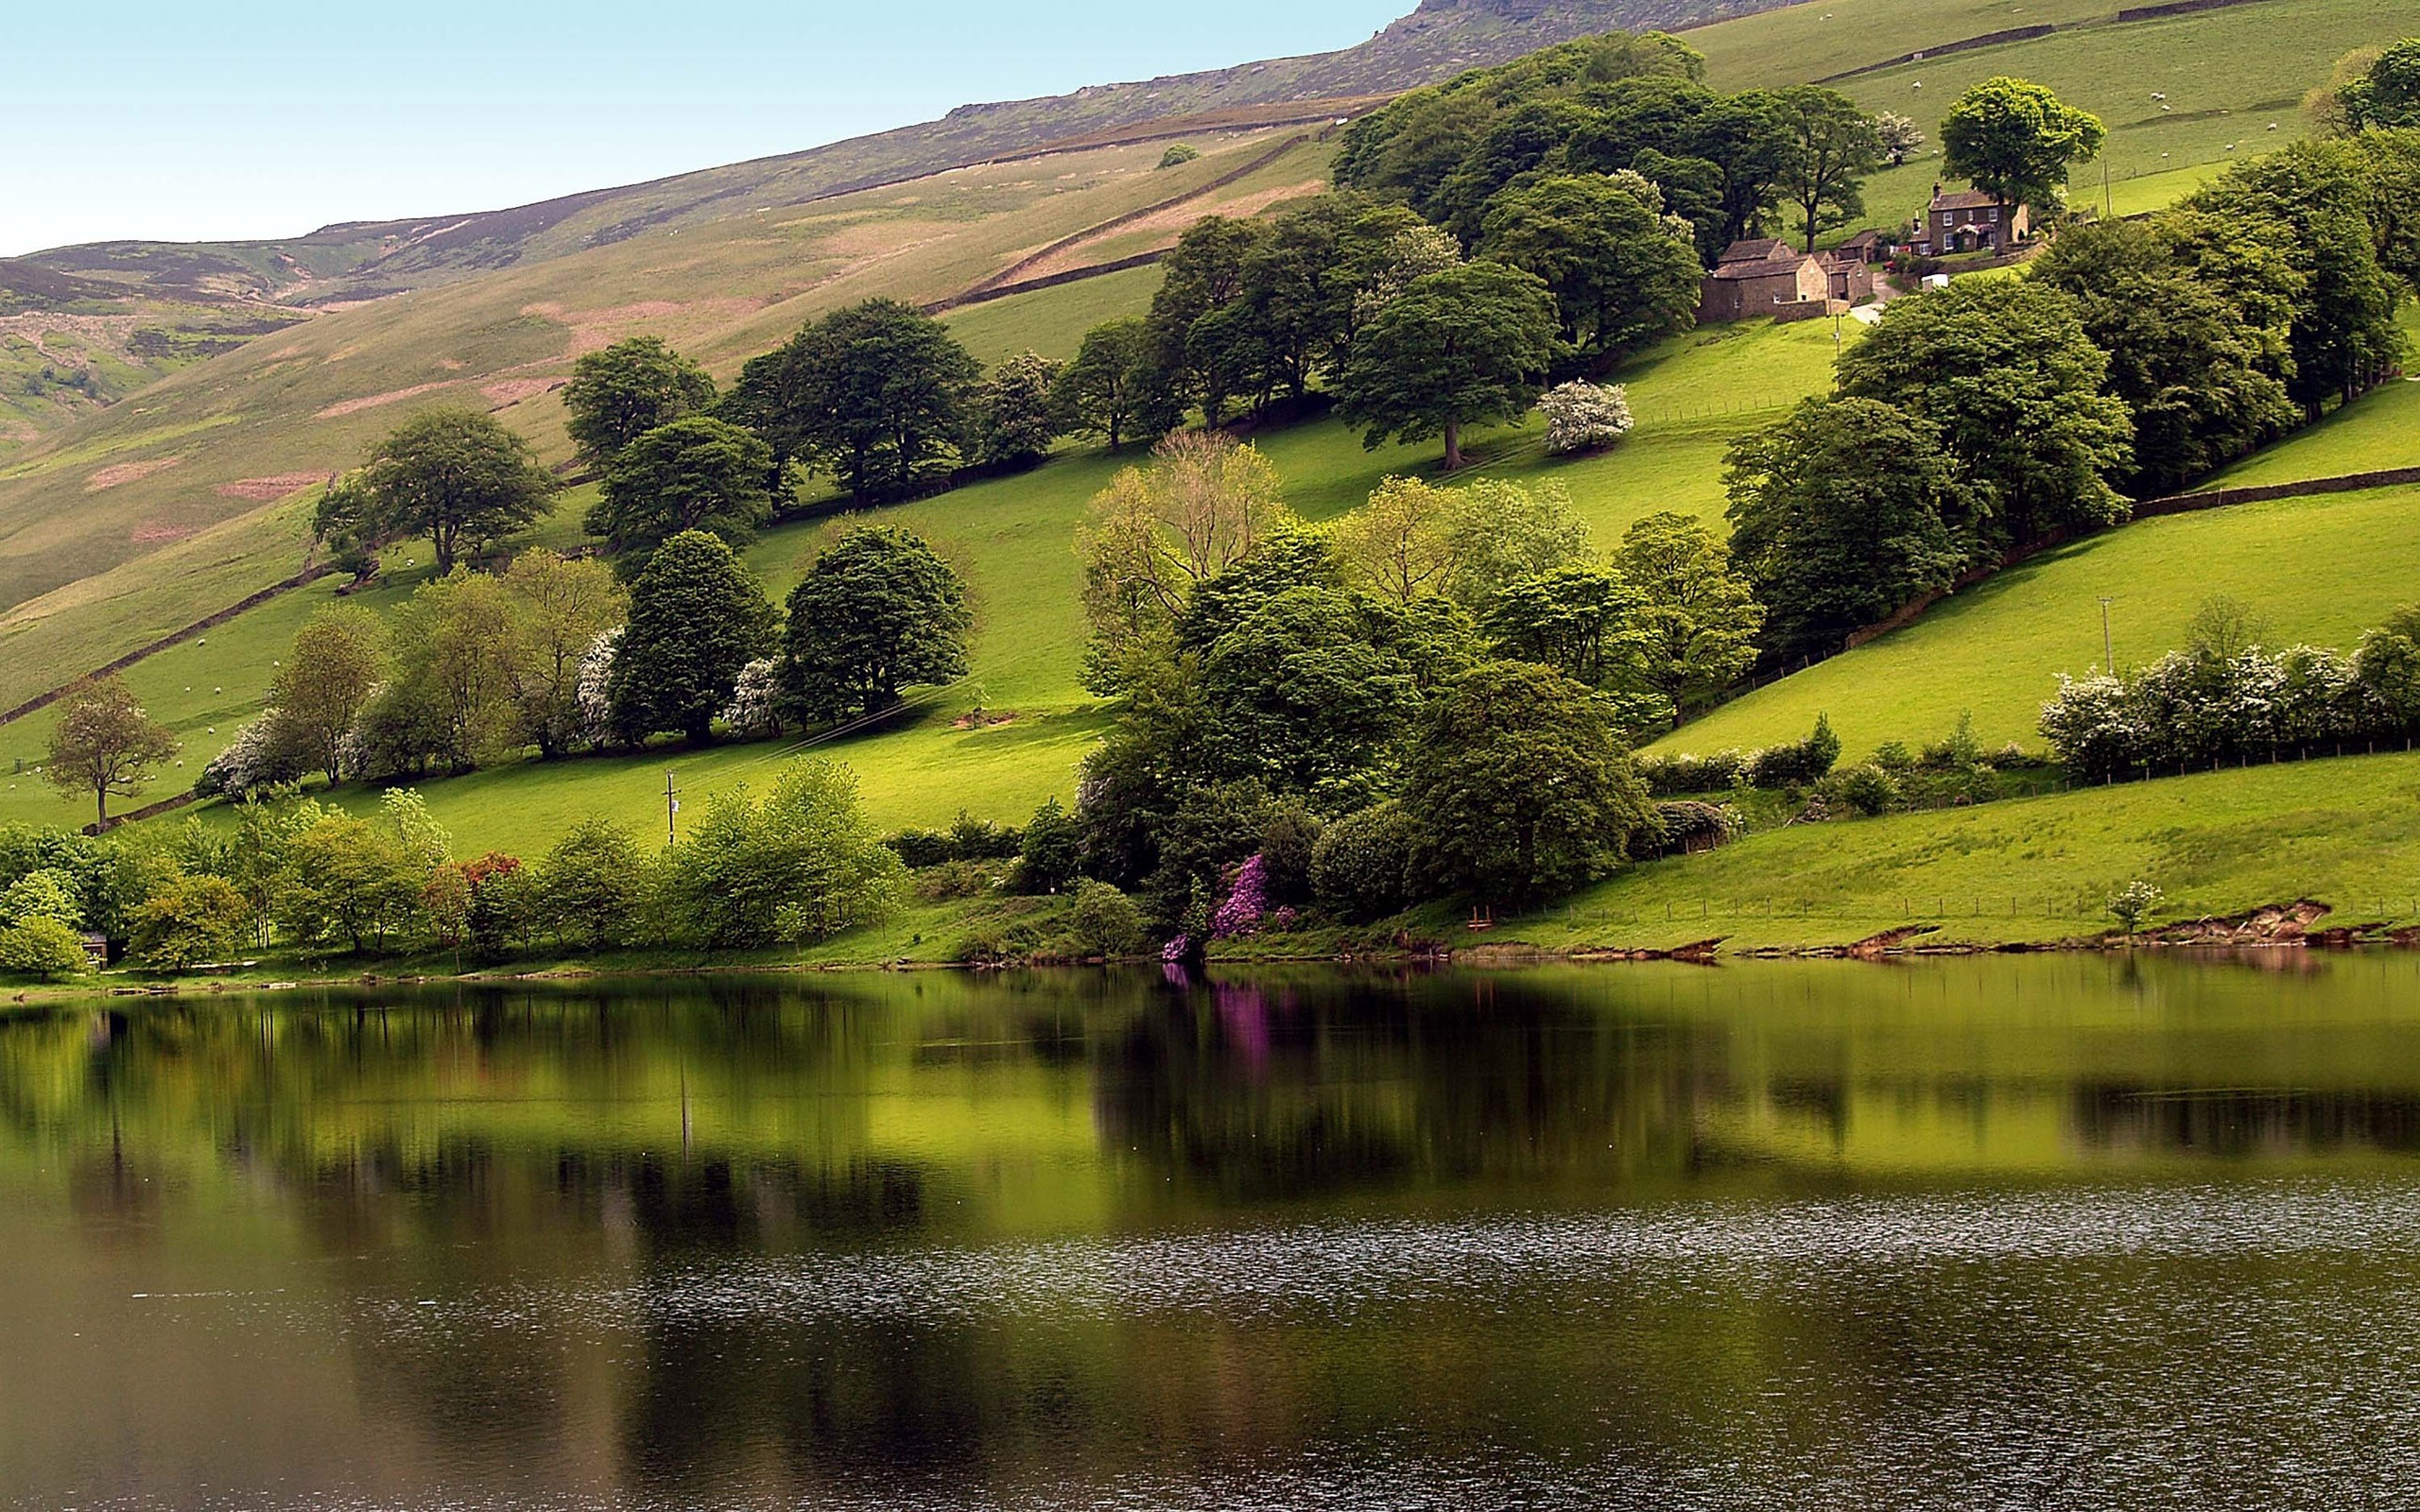 pond, photography, lake, country, field, house, landscape, mountain, tree, lakes